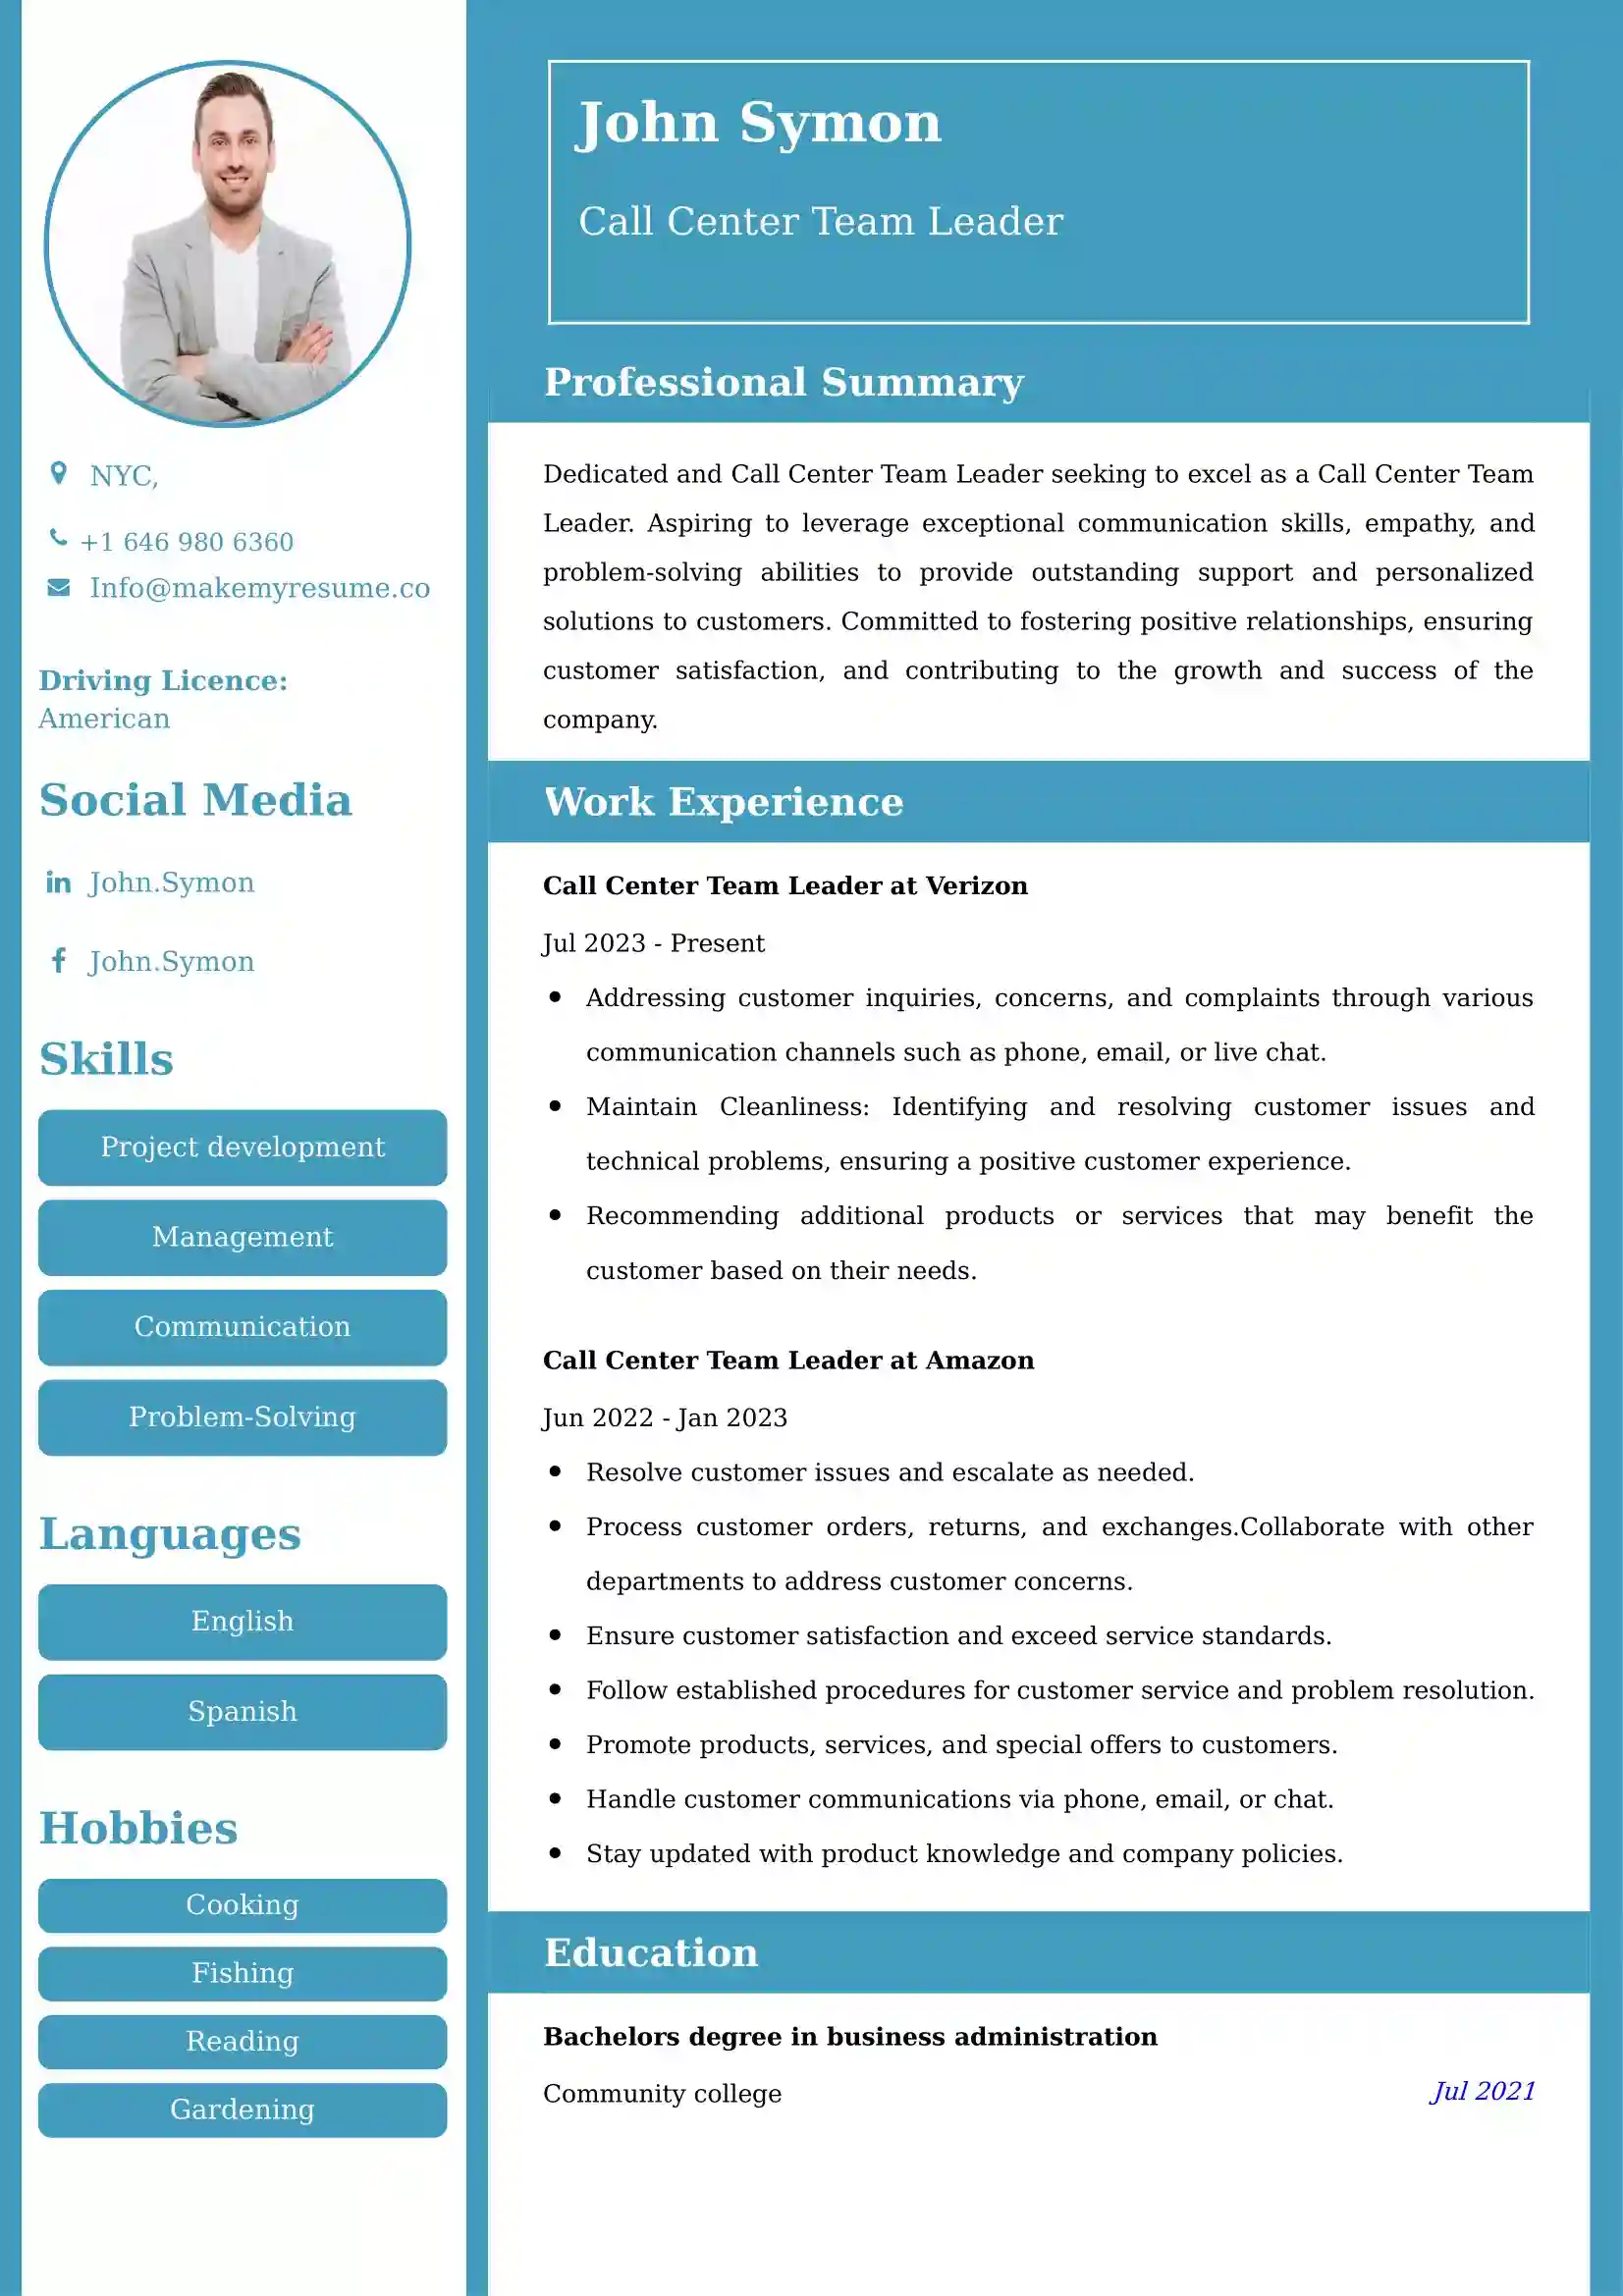 Call Center Team Leader Resume Examples - UK Format, Latest Template.